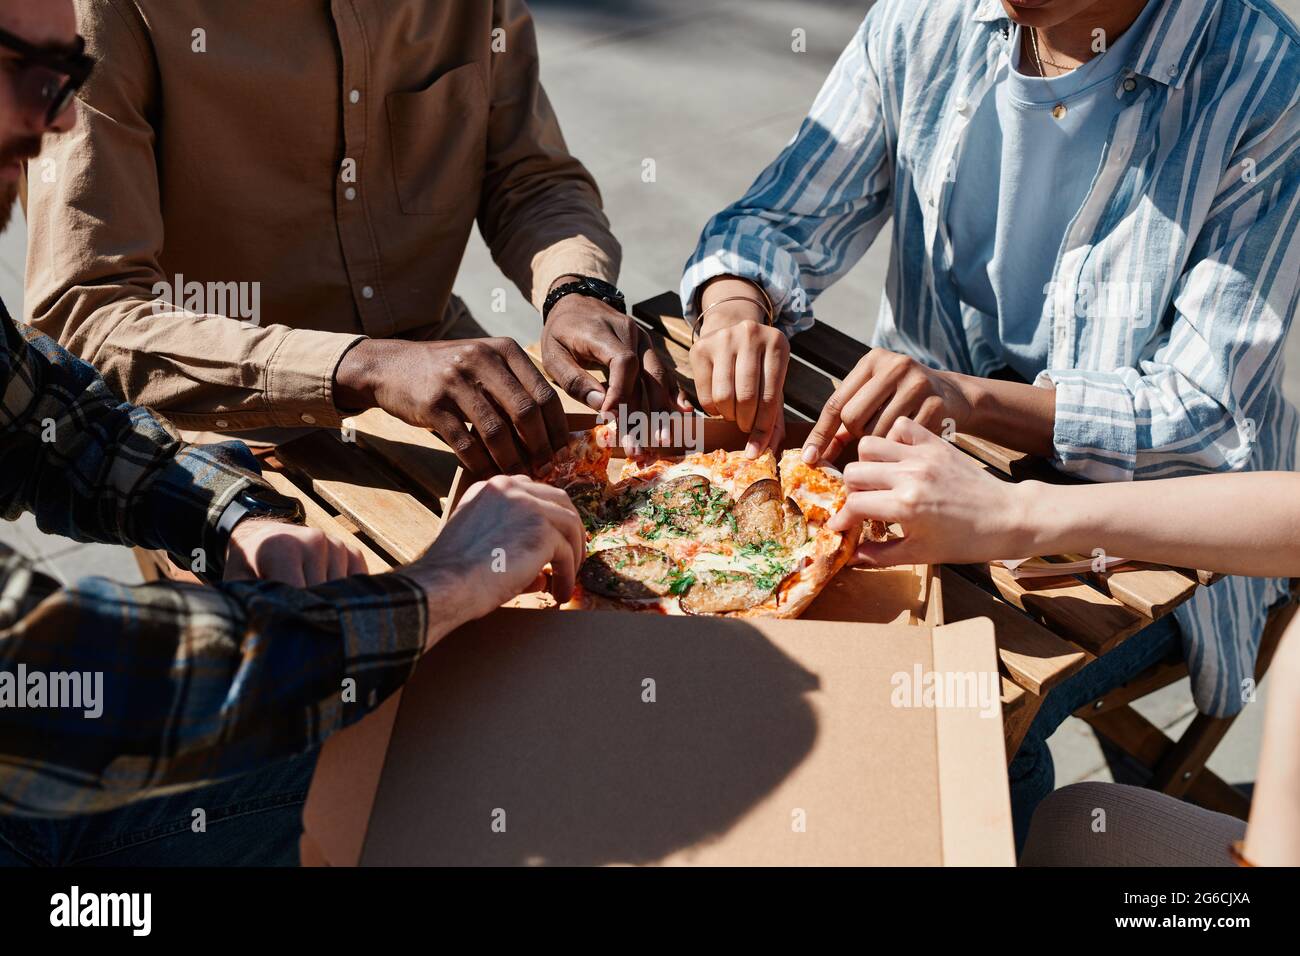 Close up of group of young people enjoying pizza outdoors, scene lit by sunlight, copy space Stock Photo